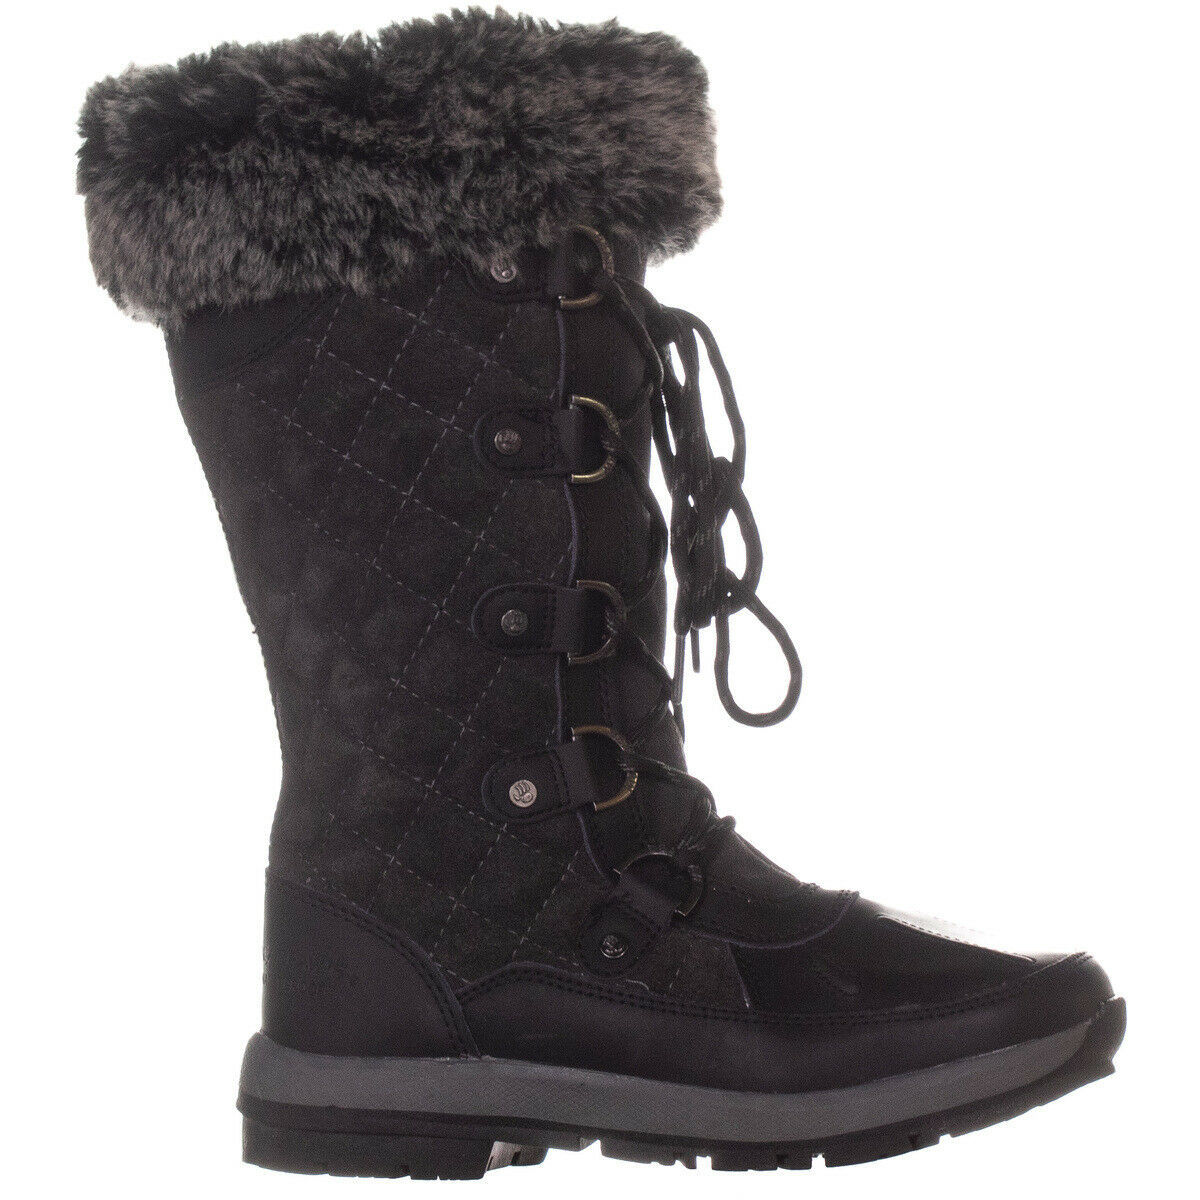 Bearpaw Gwyneth Never Wet Quilted Winter Boots, Black/grey, 5 US - Boots